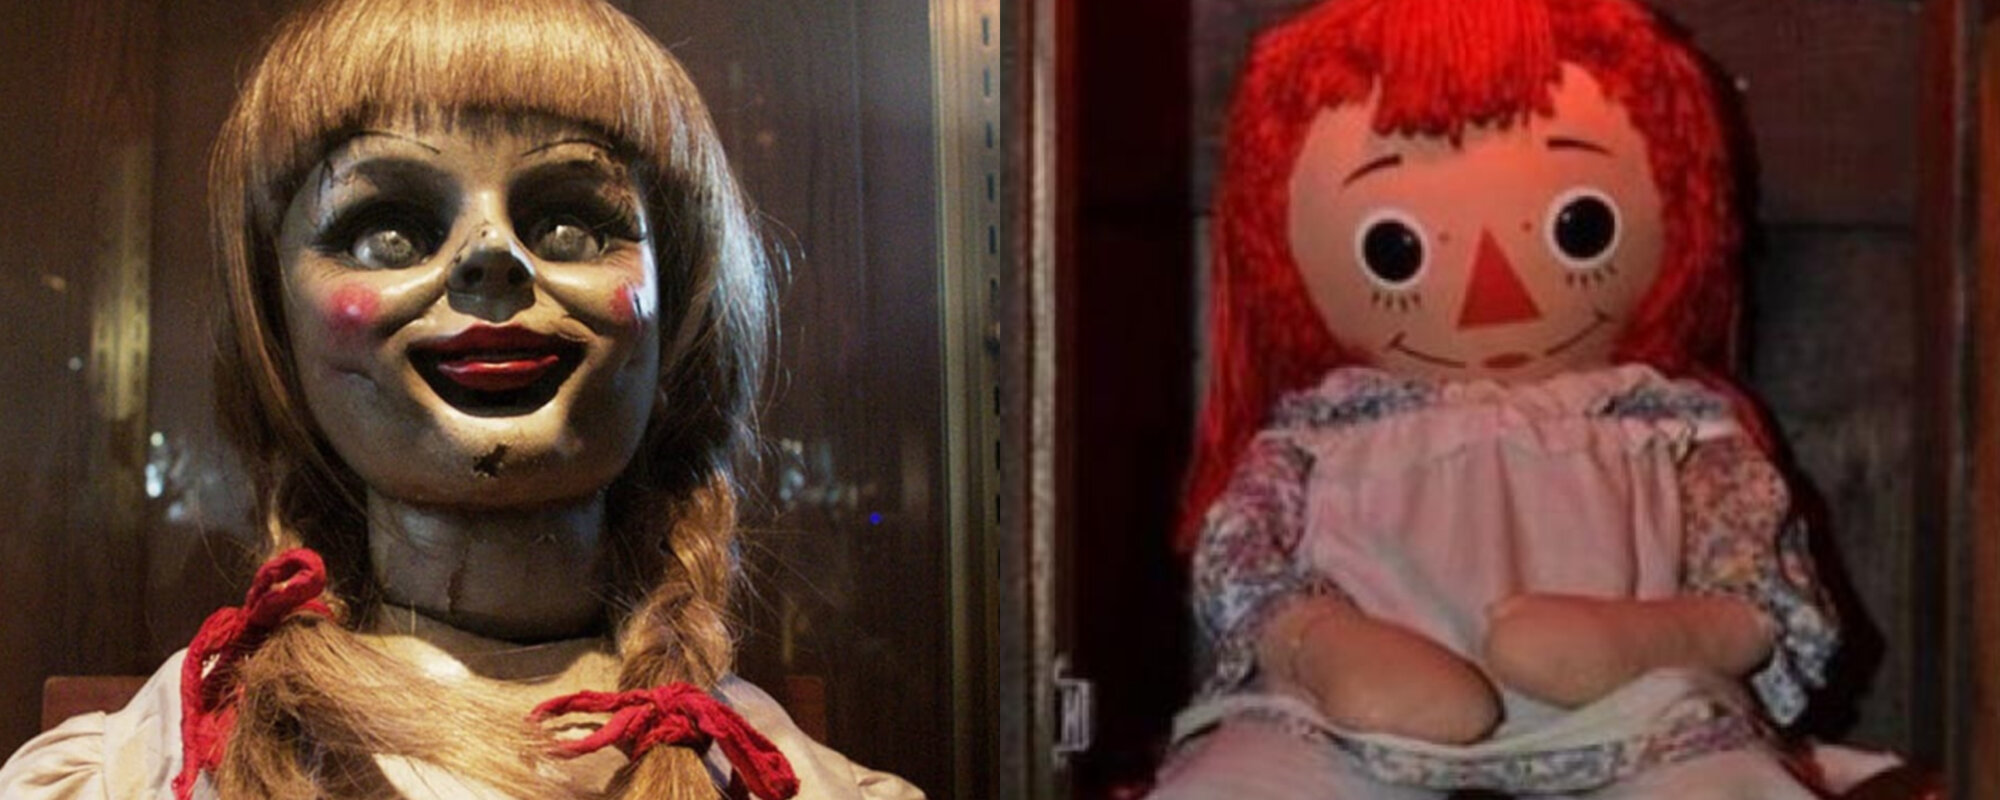 What movies is crystal the doll in